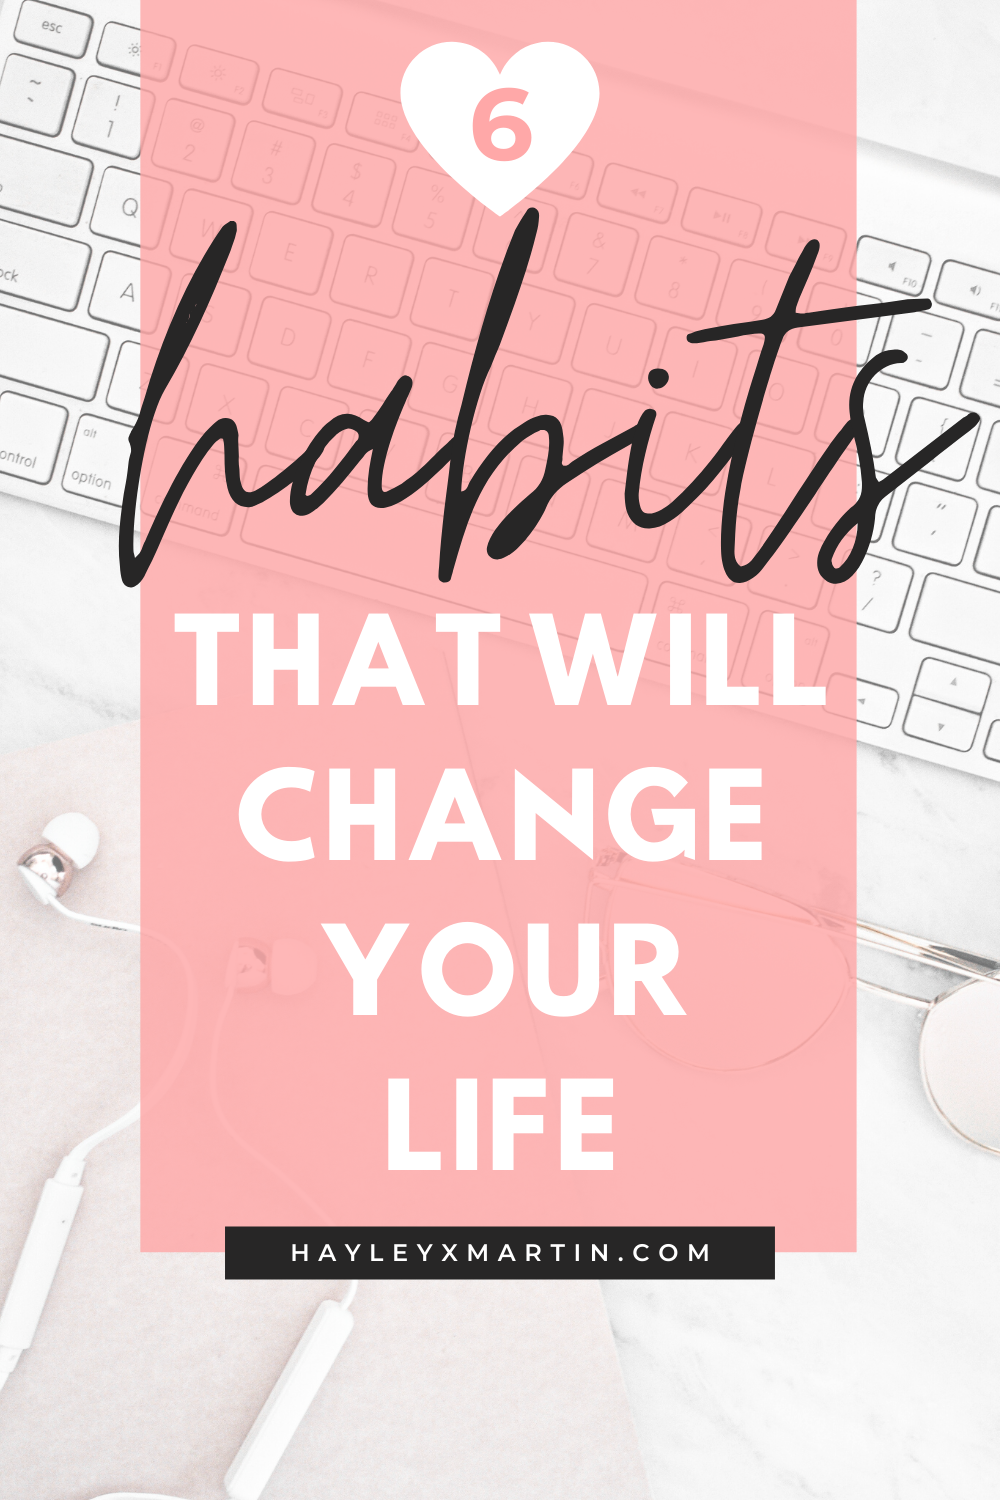 6 HABITS THAT WILL CHANGE YOUR LIFE | HAYLEYXMARTIN